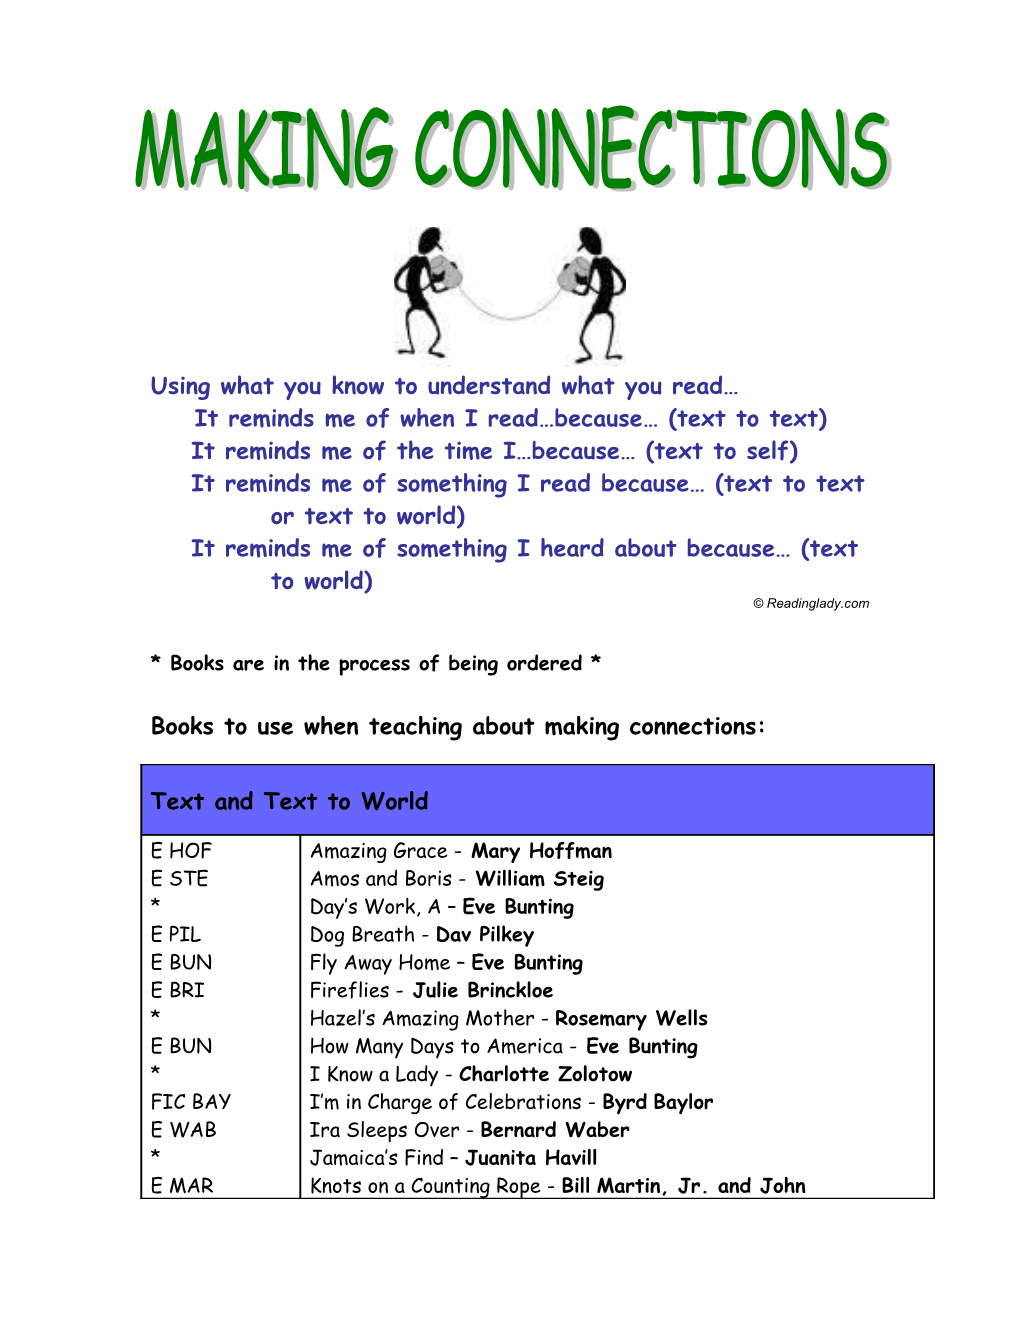 MAKING CONNECTIONS (Text to Self, Text to Text and Text to World)